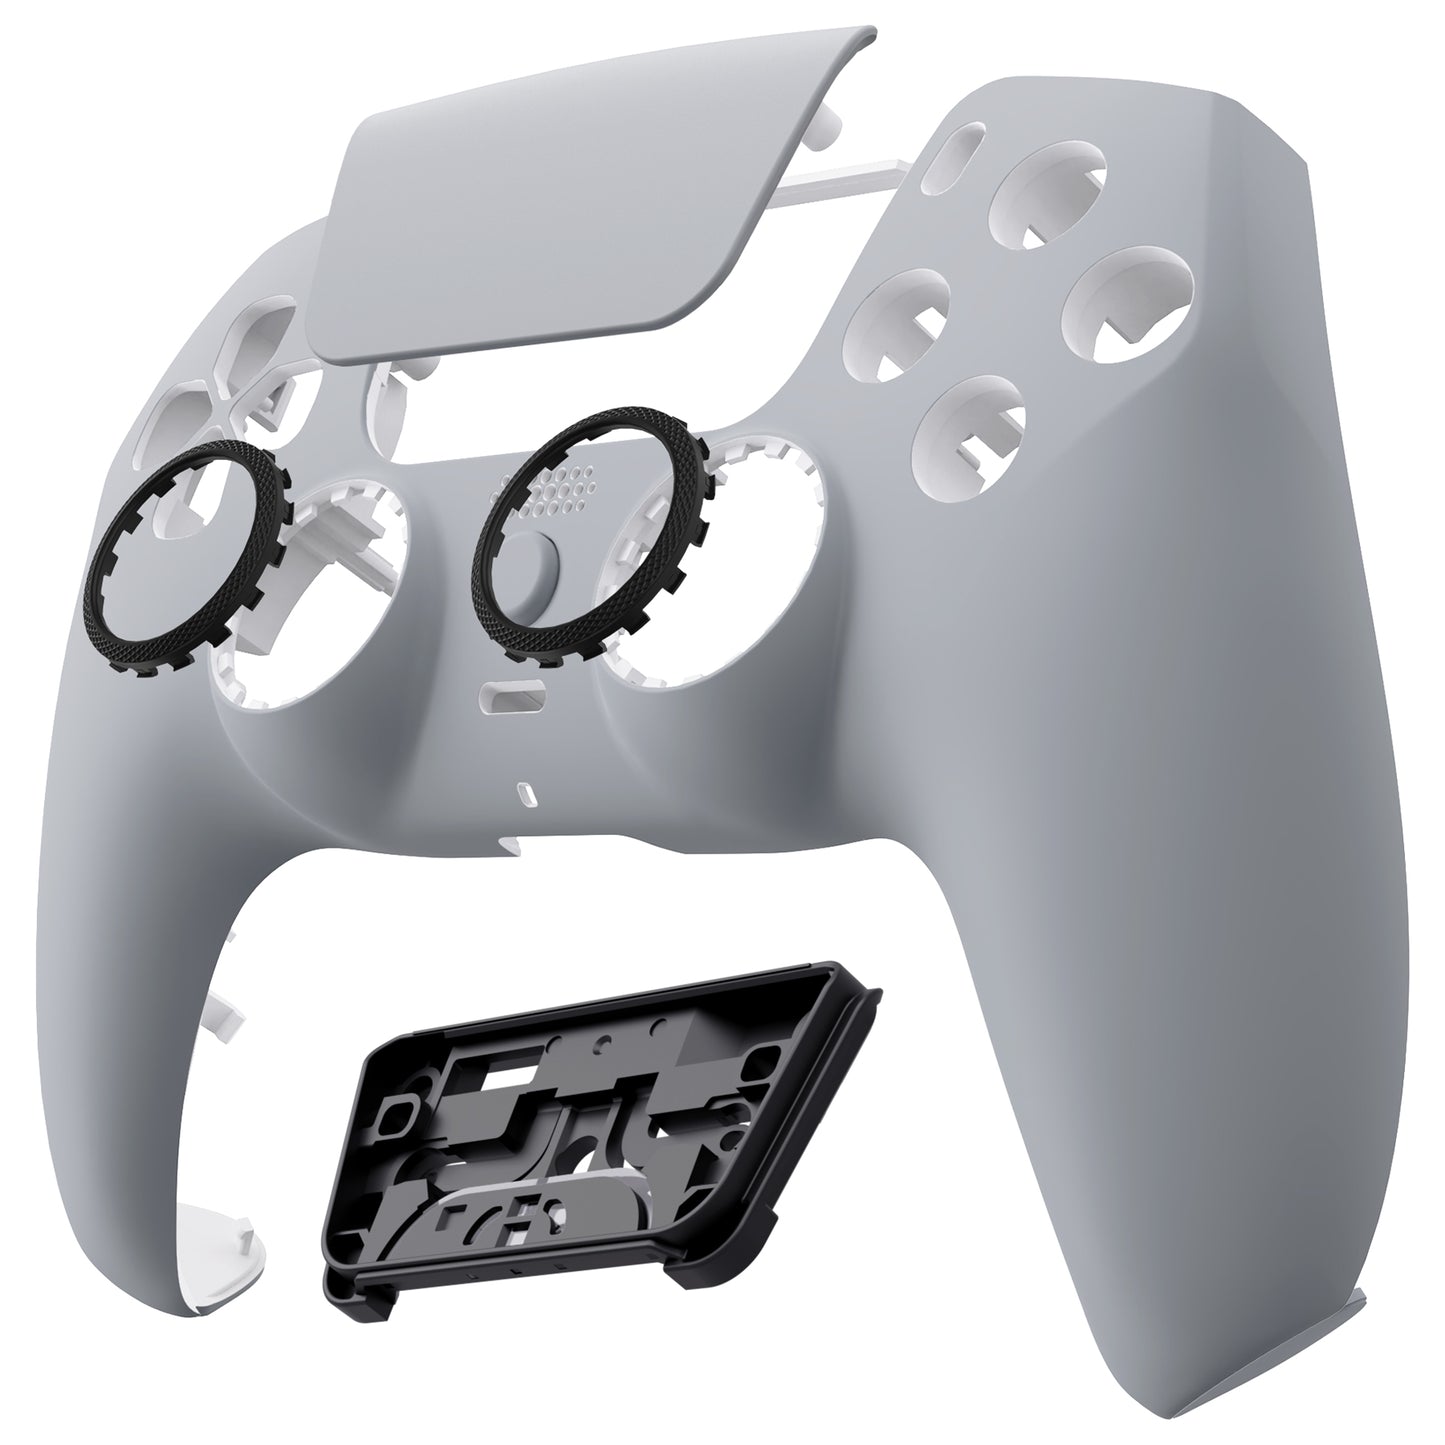 eXtremeRate LUNA Redesigned Replacement Front Shell with Touchpad Compatible with PS5 Controller BDM-010 BDM-020 BDM-030 - New Hope Gray eXtremeRate